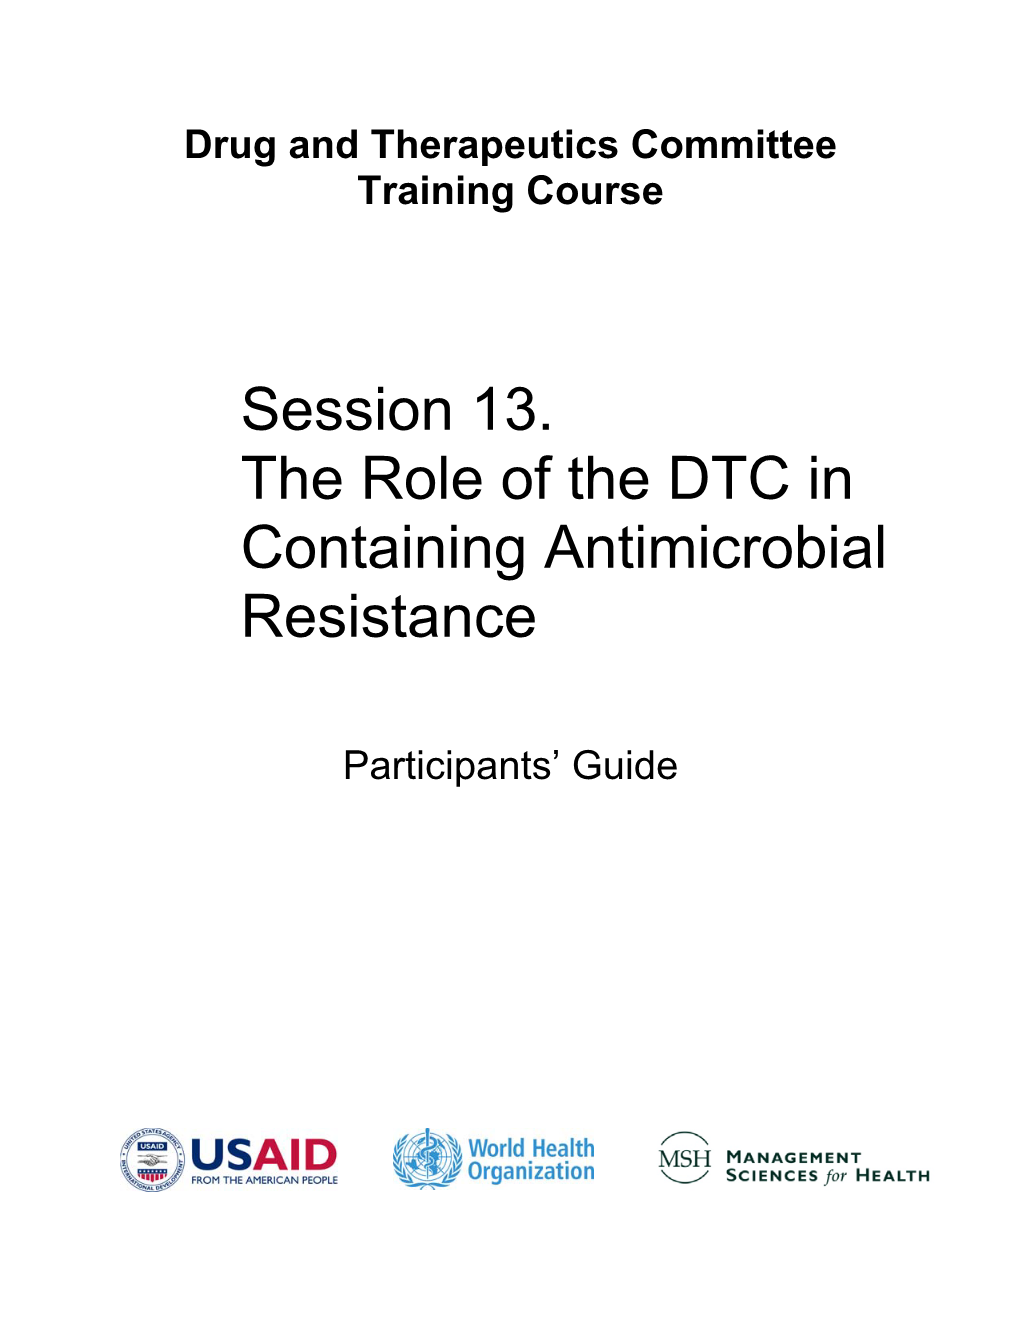 Session 13. the Role of the DTC in Containing Antimicrobial Resistance